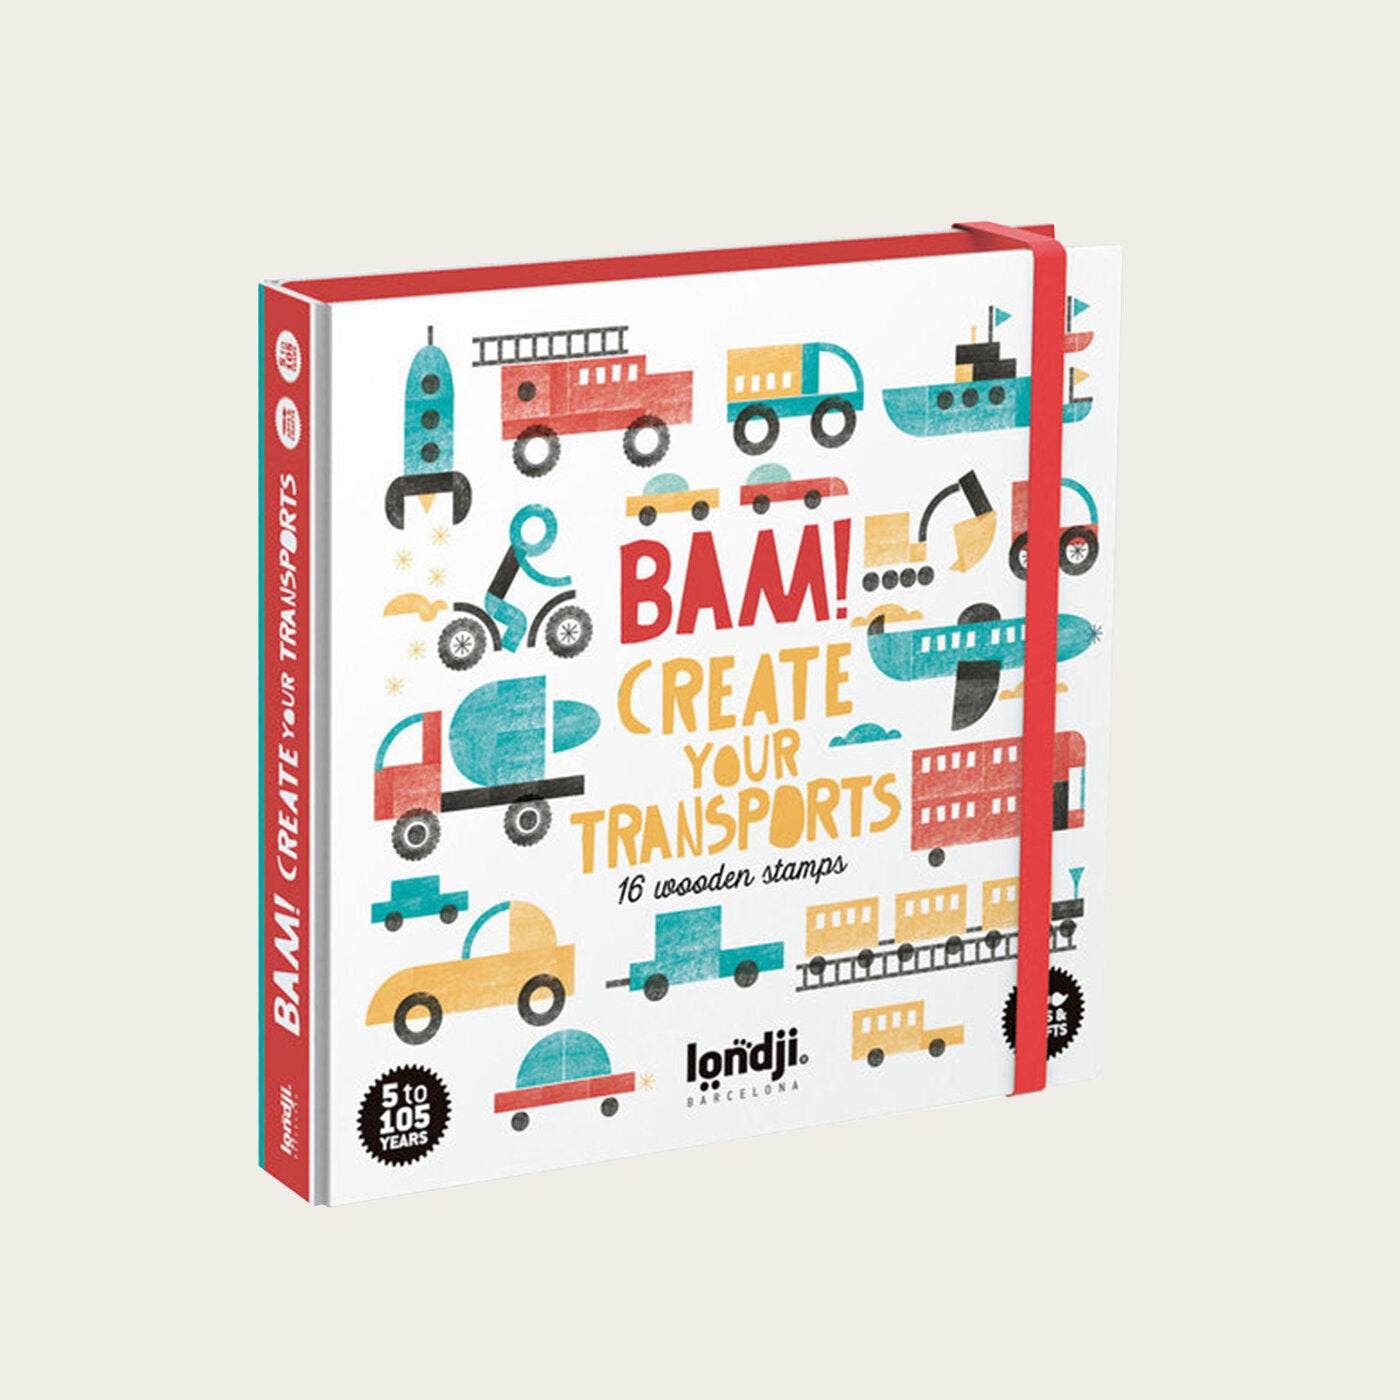 Bam! Create Your Transports!